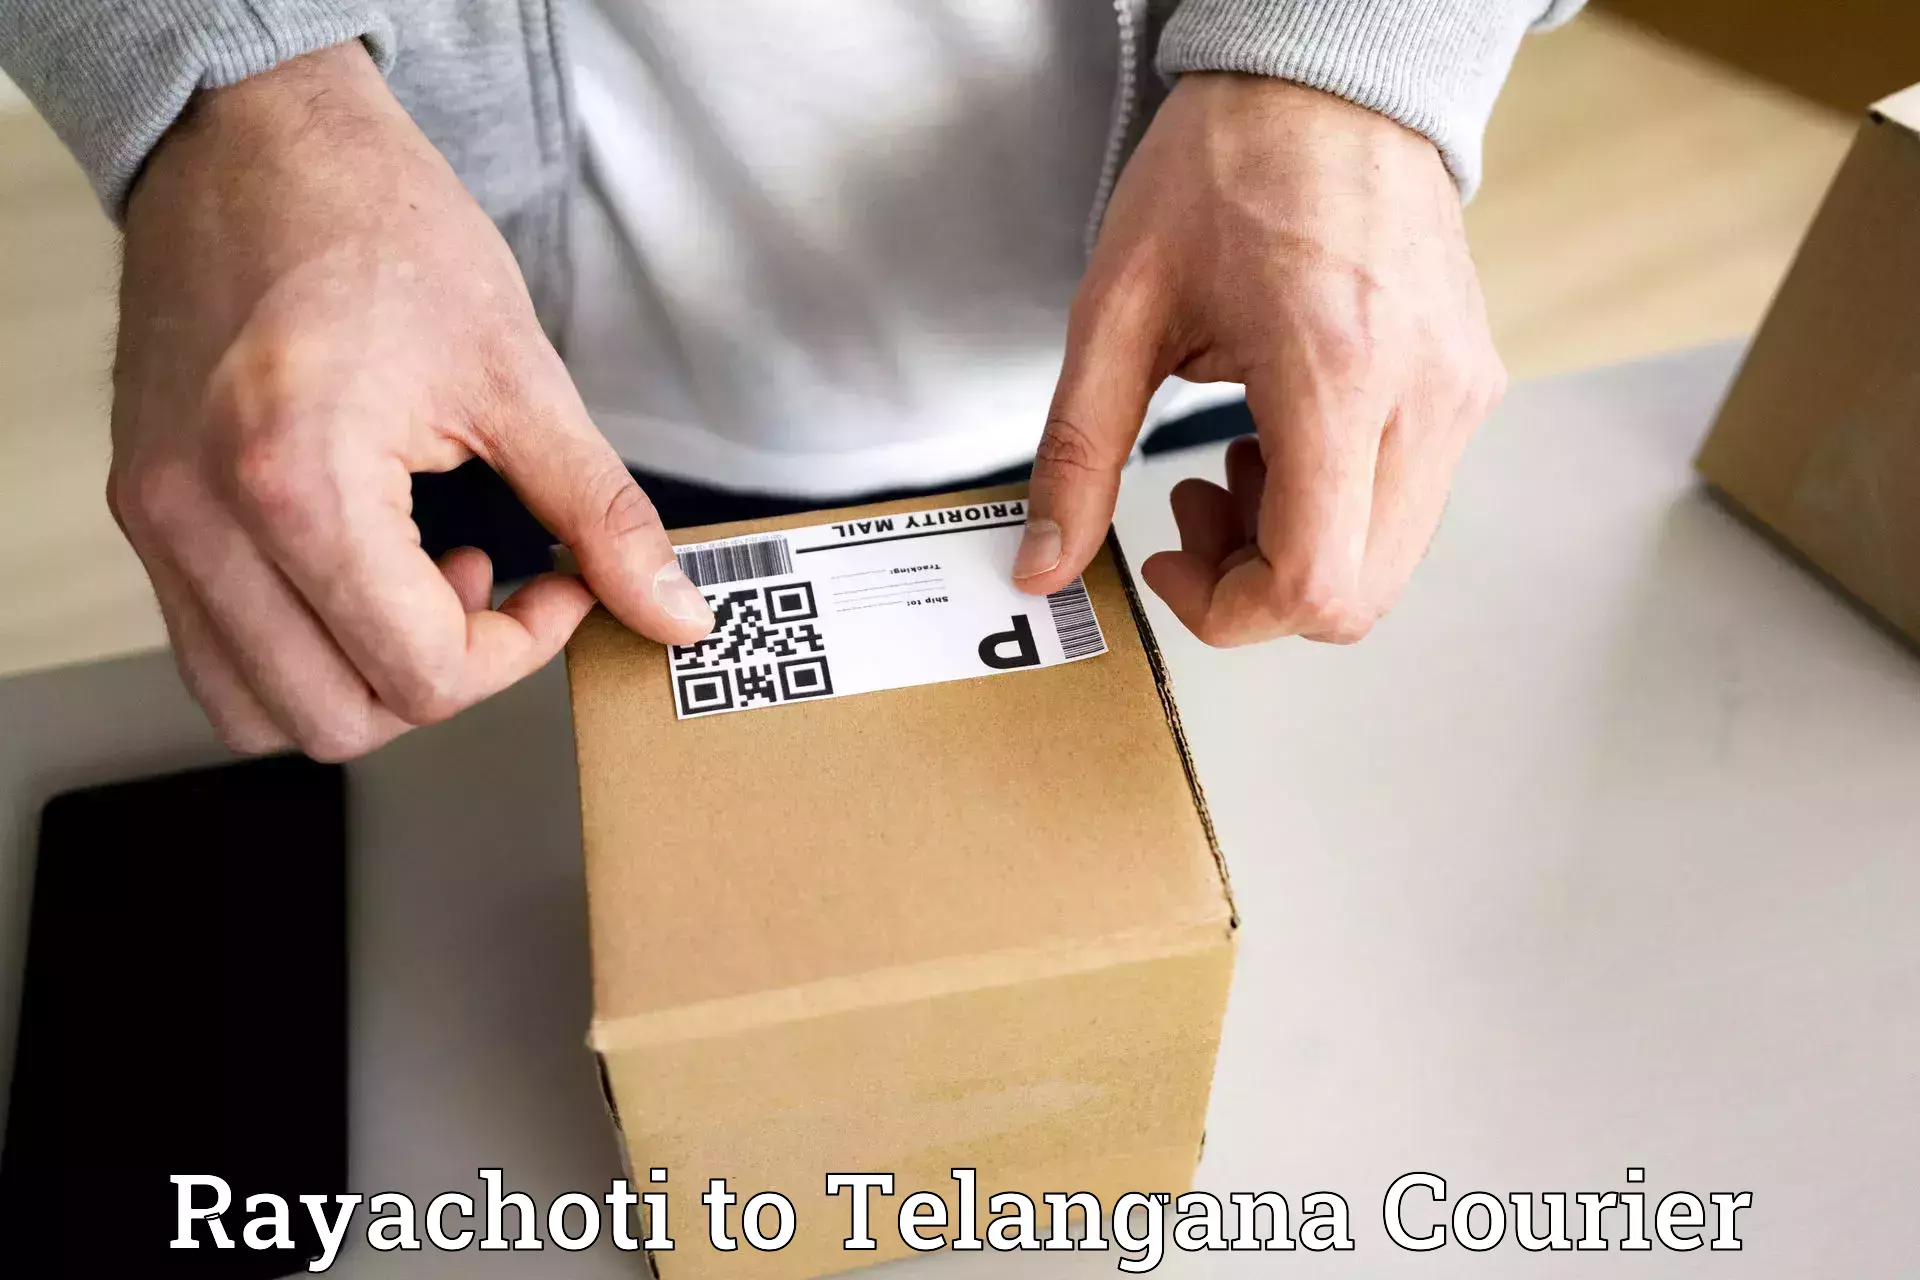 Reliable courier service in Rayachoti to Siddipet